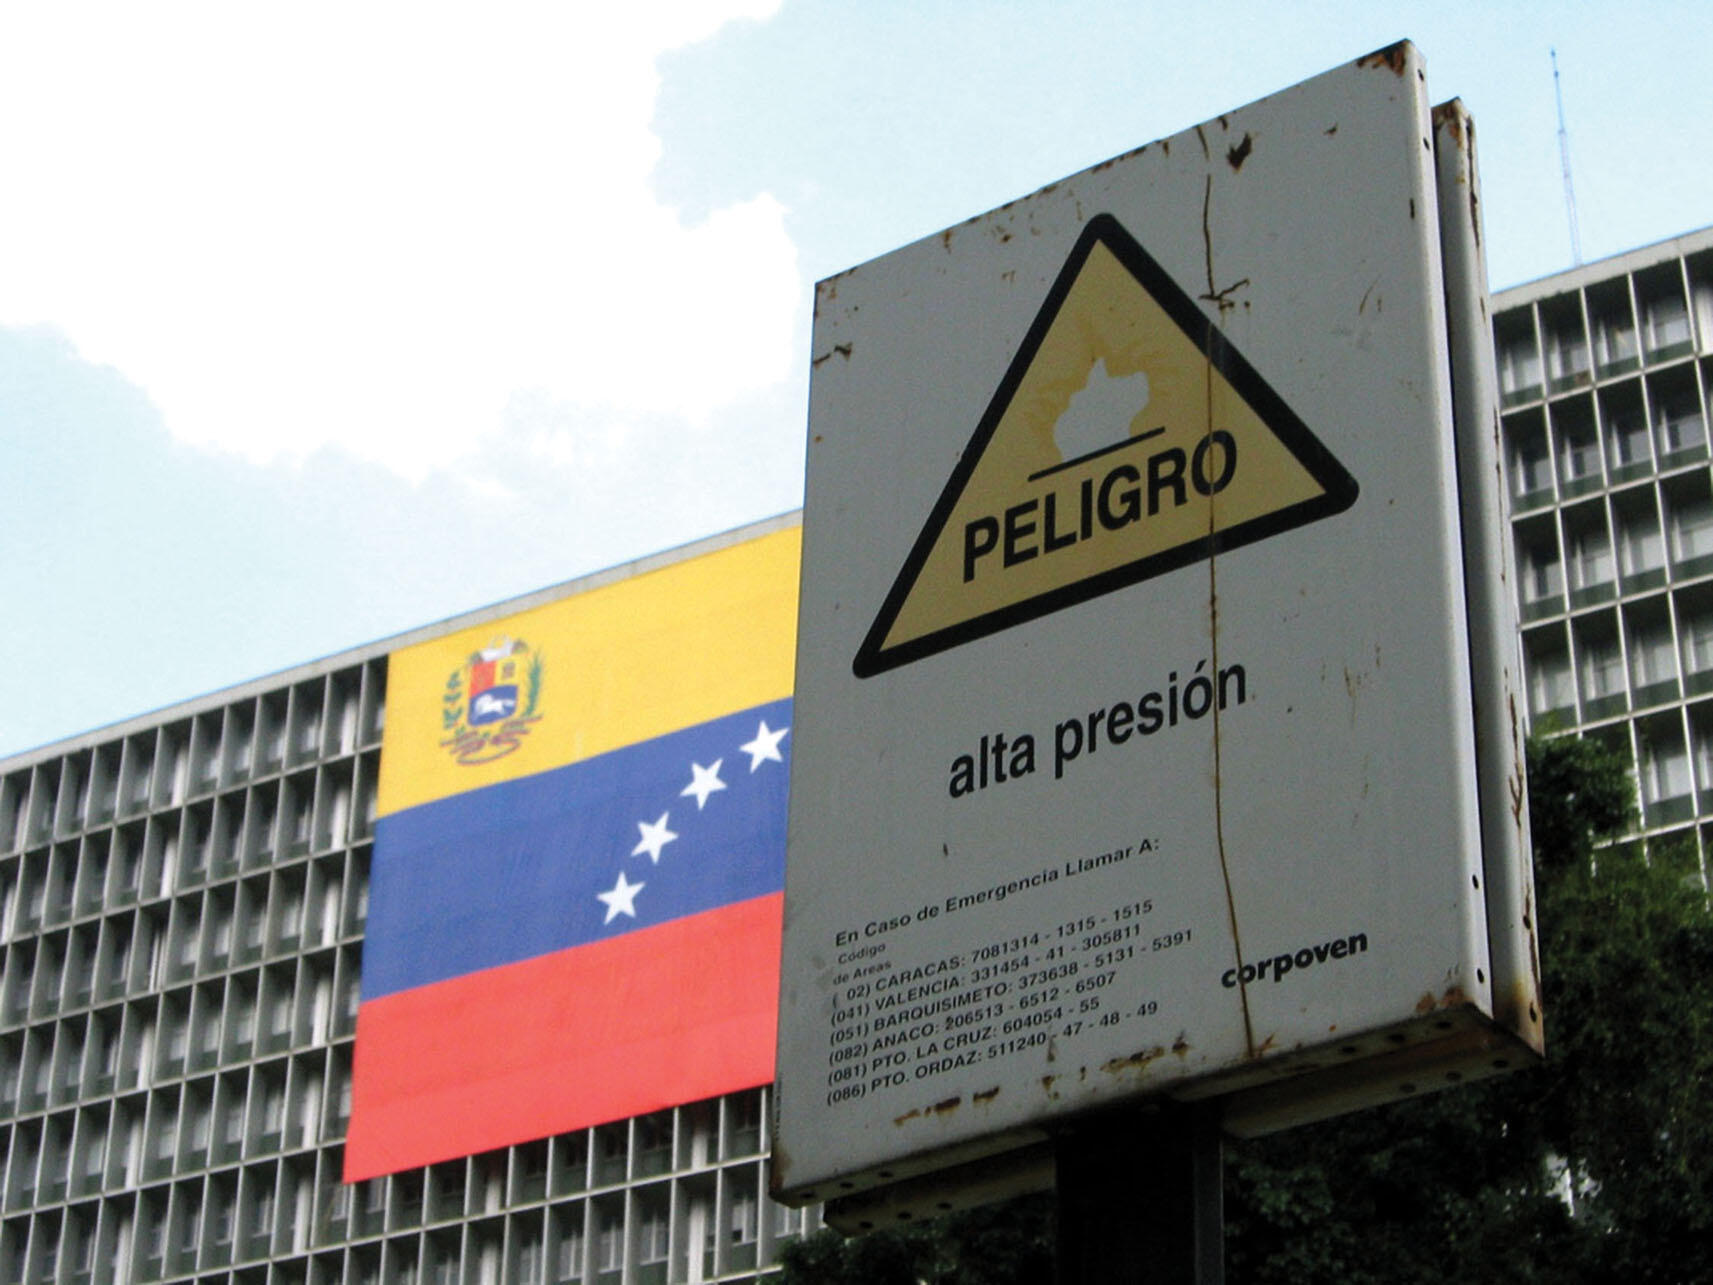  High Pressure" reads a sign outside the Banaven Center in Caracas. (Photo by Alejandro Forero Cuervo.)